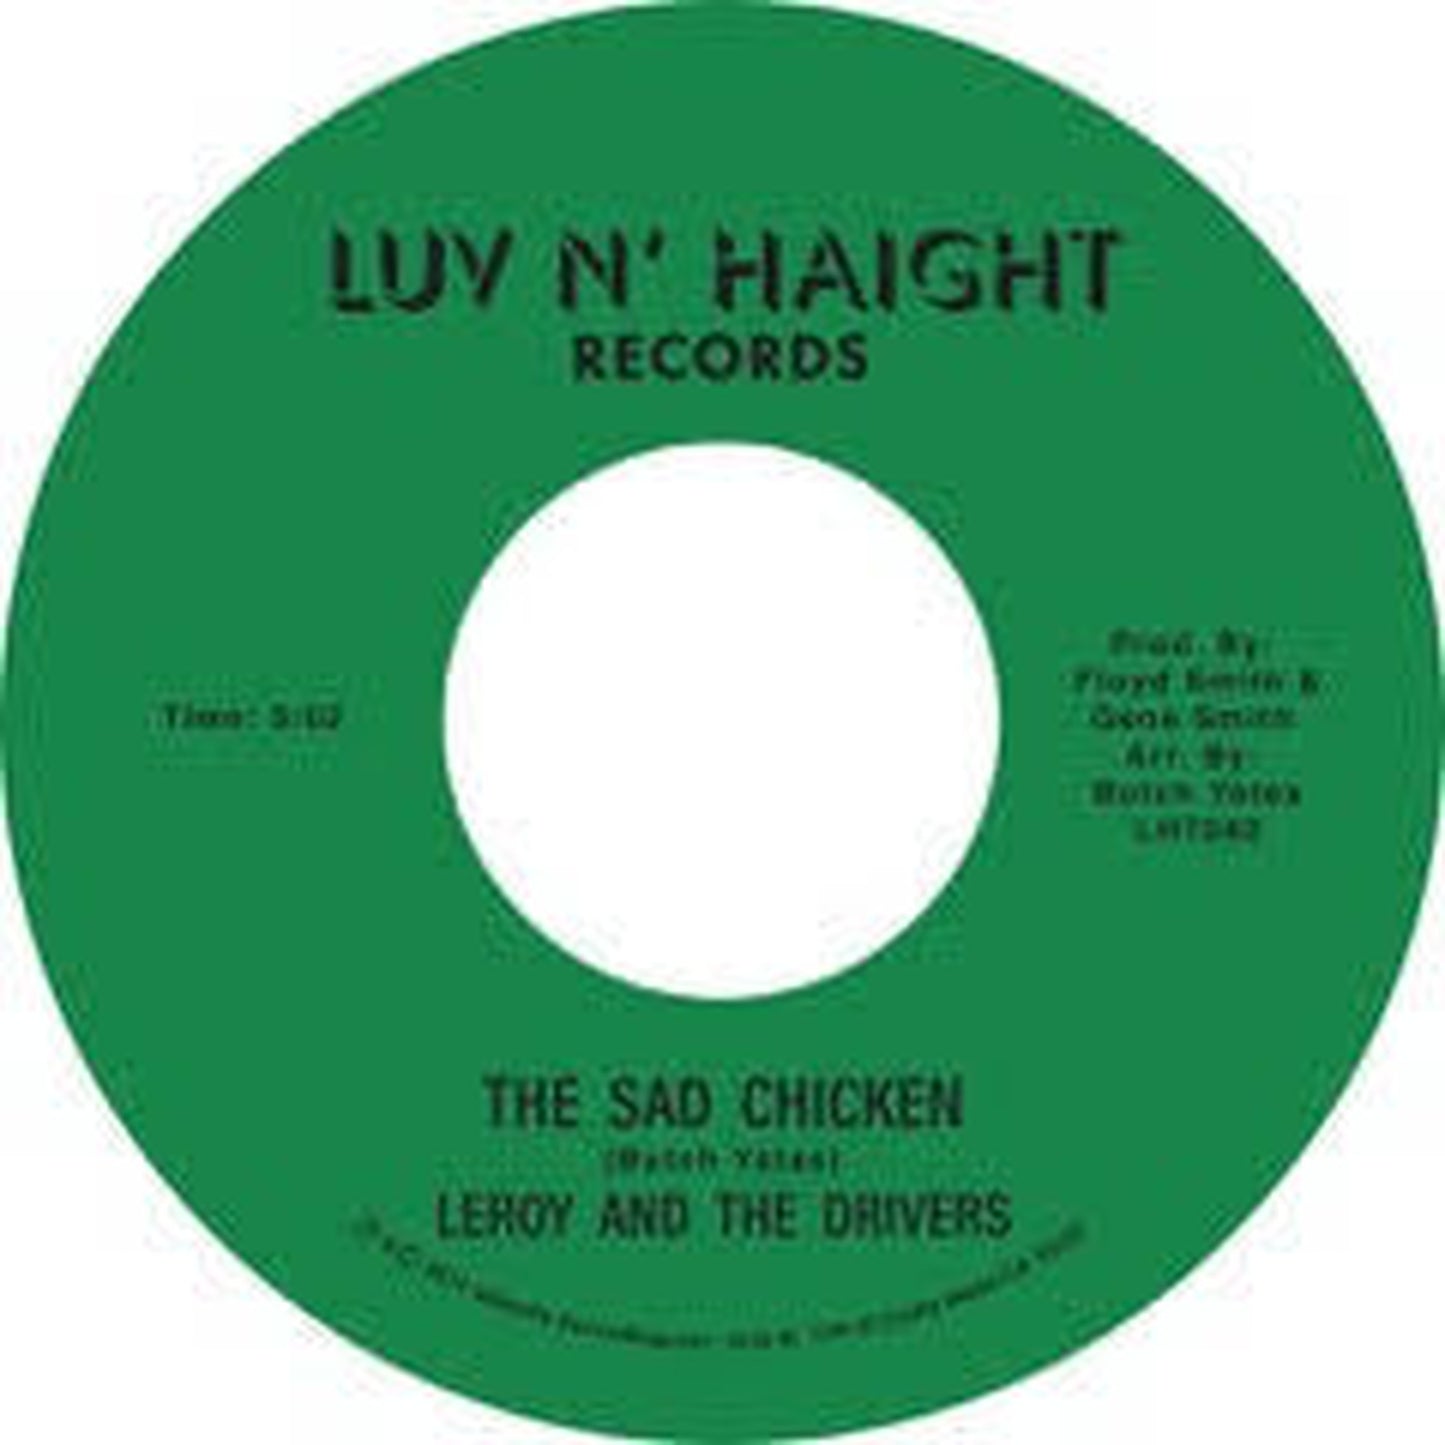 【7"】Leroy and The Drivers - The Sad Chicken